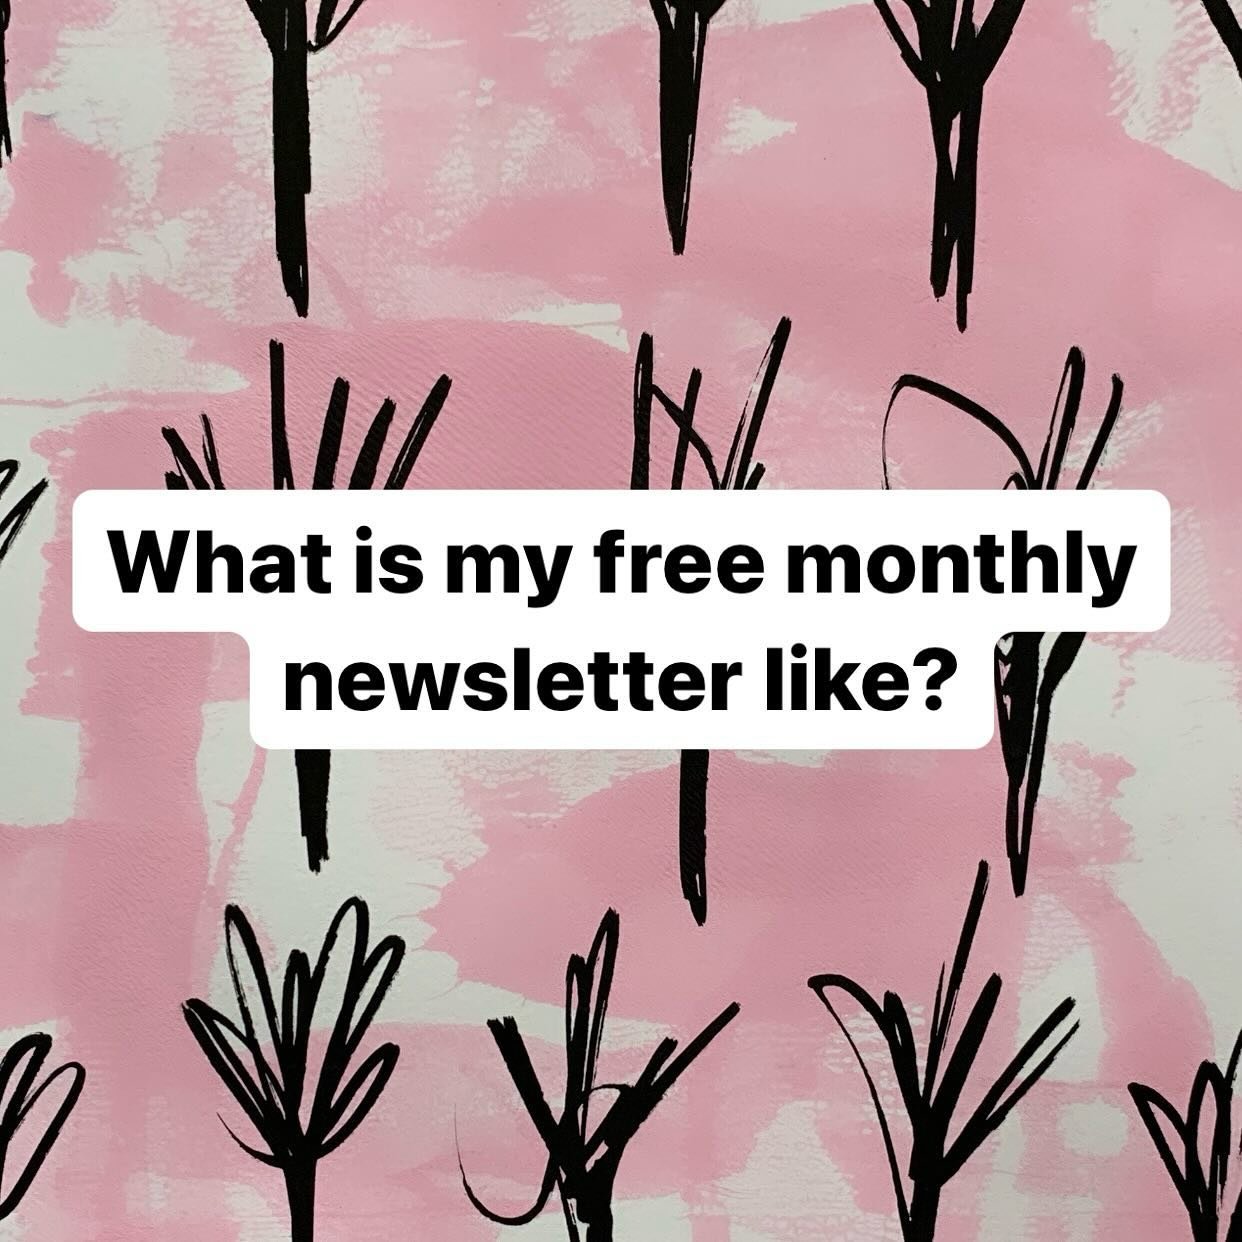 Have you been wondering what my free monthly newsletter is like?  I put together a few shots from previous versions to give you a sneak peek!  I truly want each newsletter to be a pleasure to read, beautiful to look at, packed with goodies for YOU, a